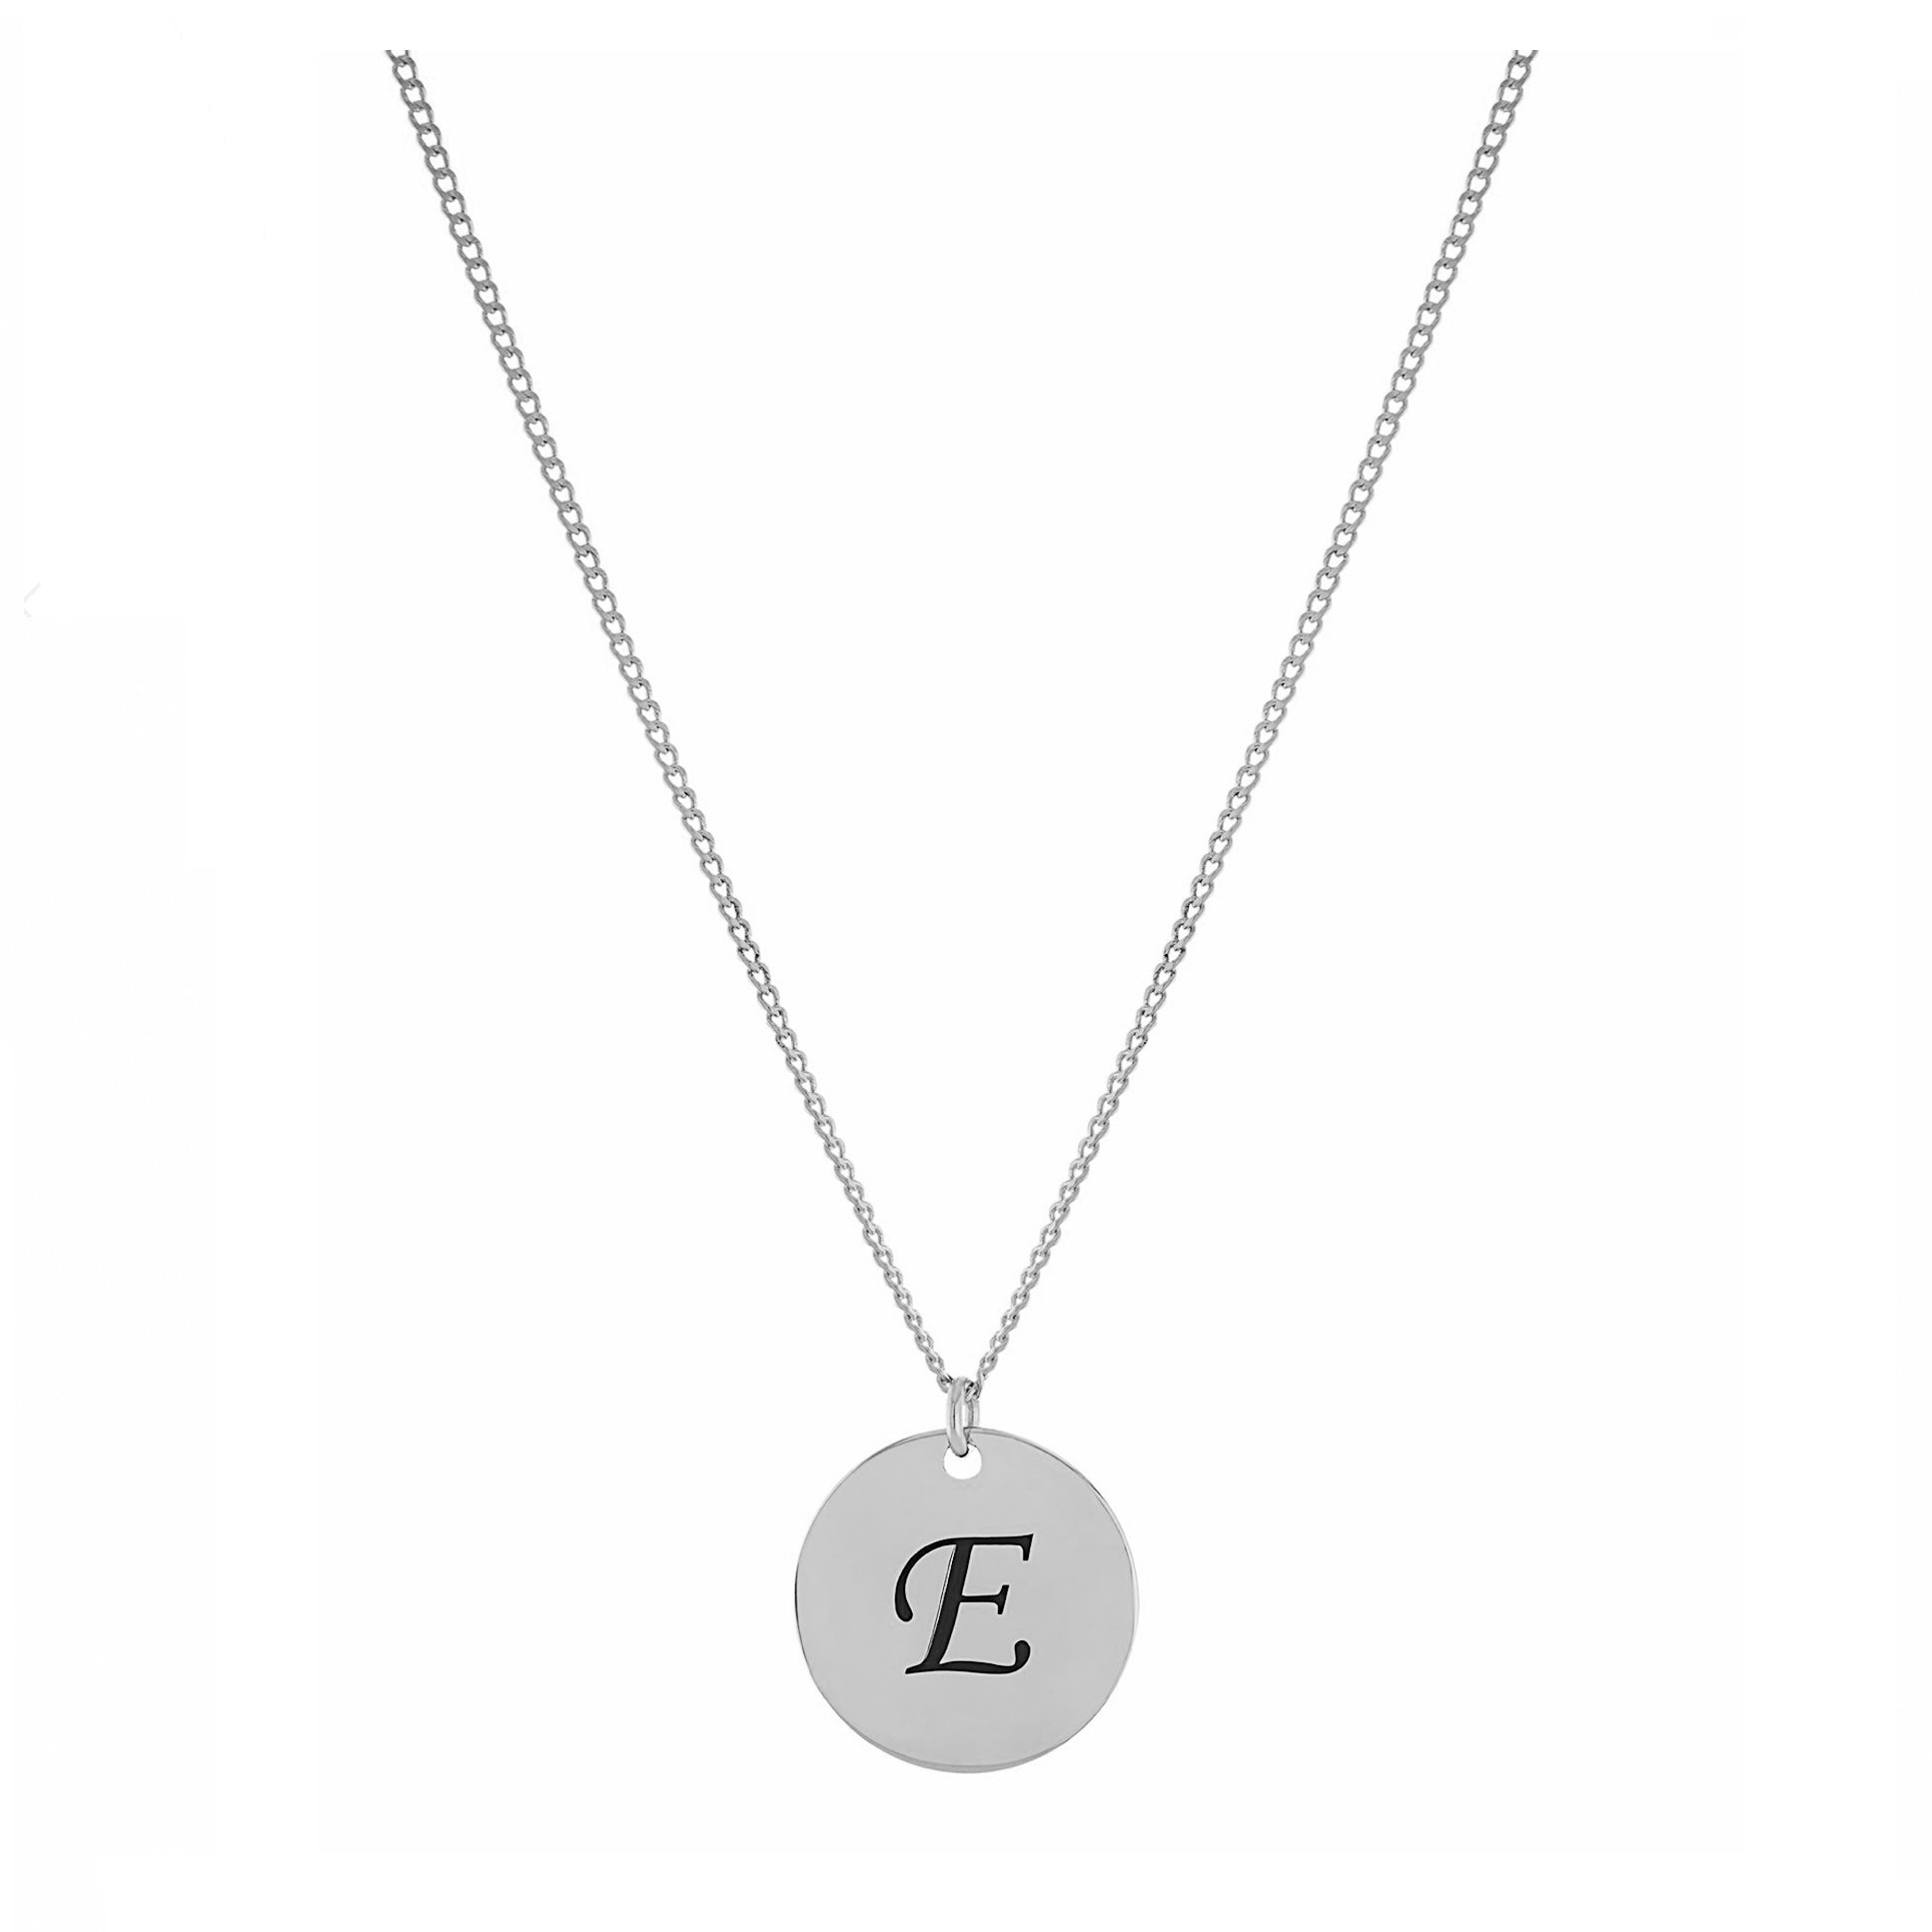 Personalized Script Initial Disc Necklace